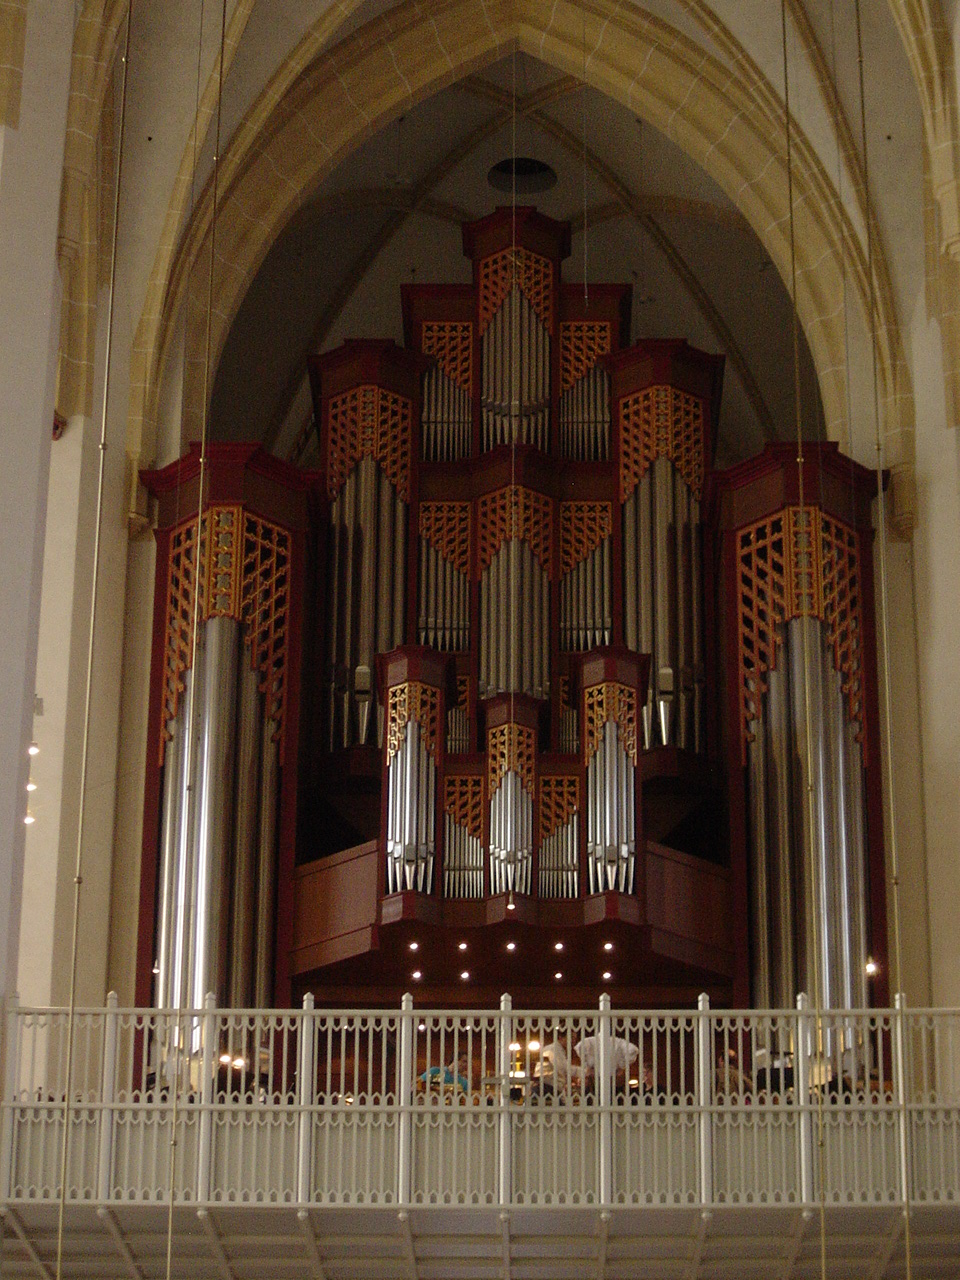 the pipe organ is displayed in a large building